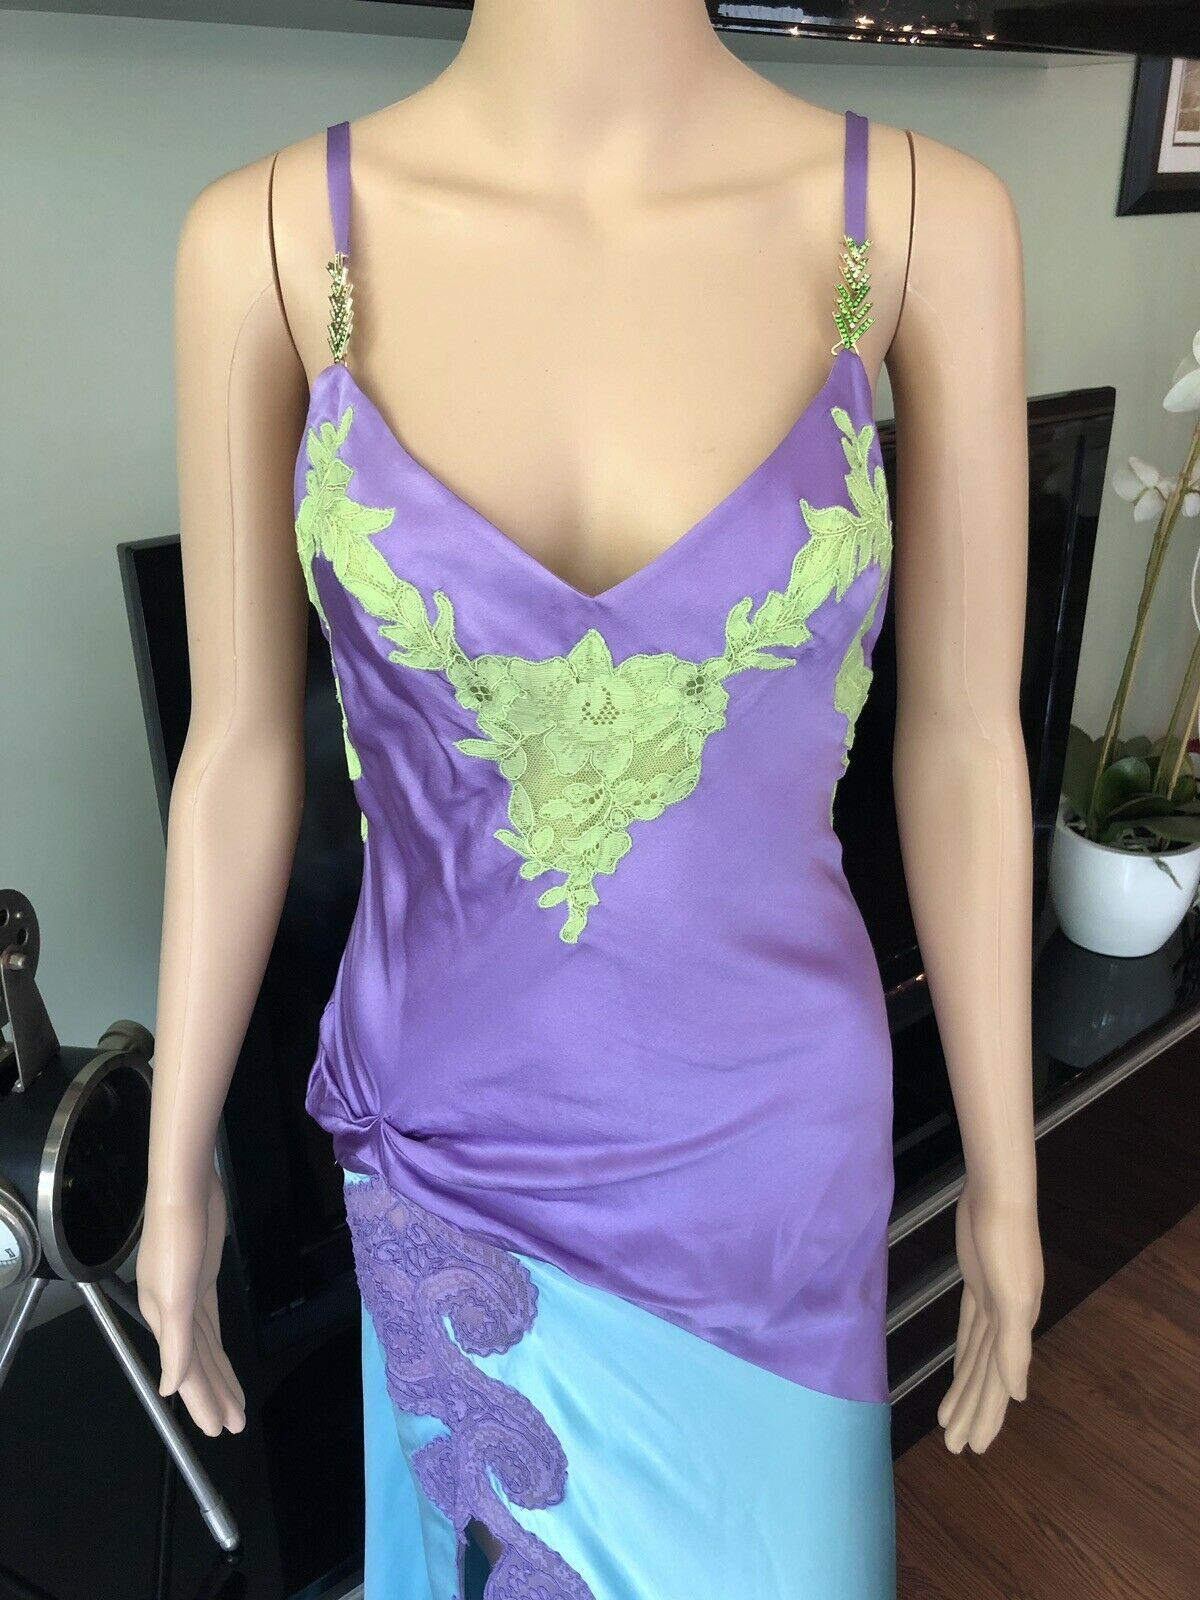 Gianni Versace F/W 1996 Runway Vintage Iconic Silk Dress Gown  In Good Condition For Sale In Naples, FL